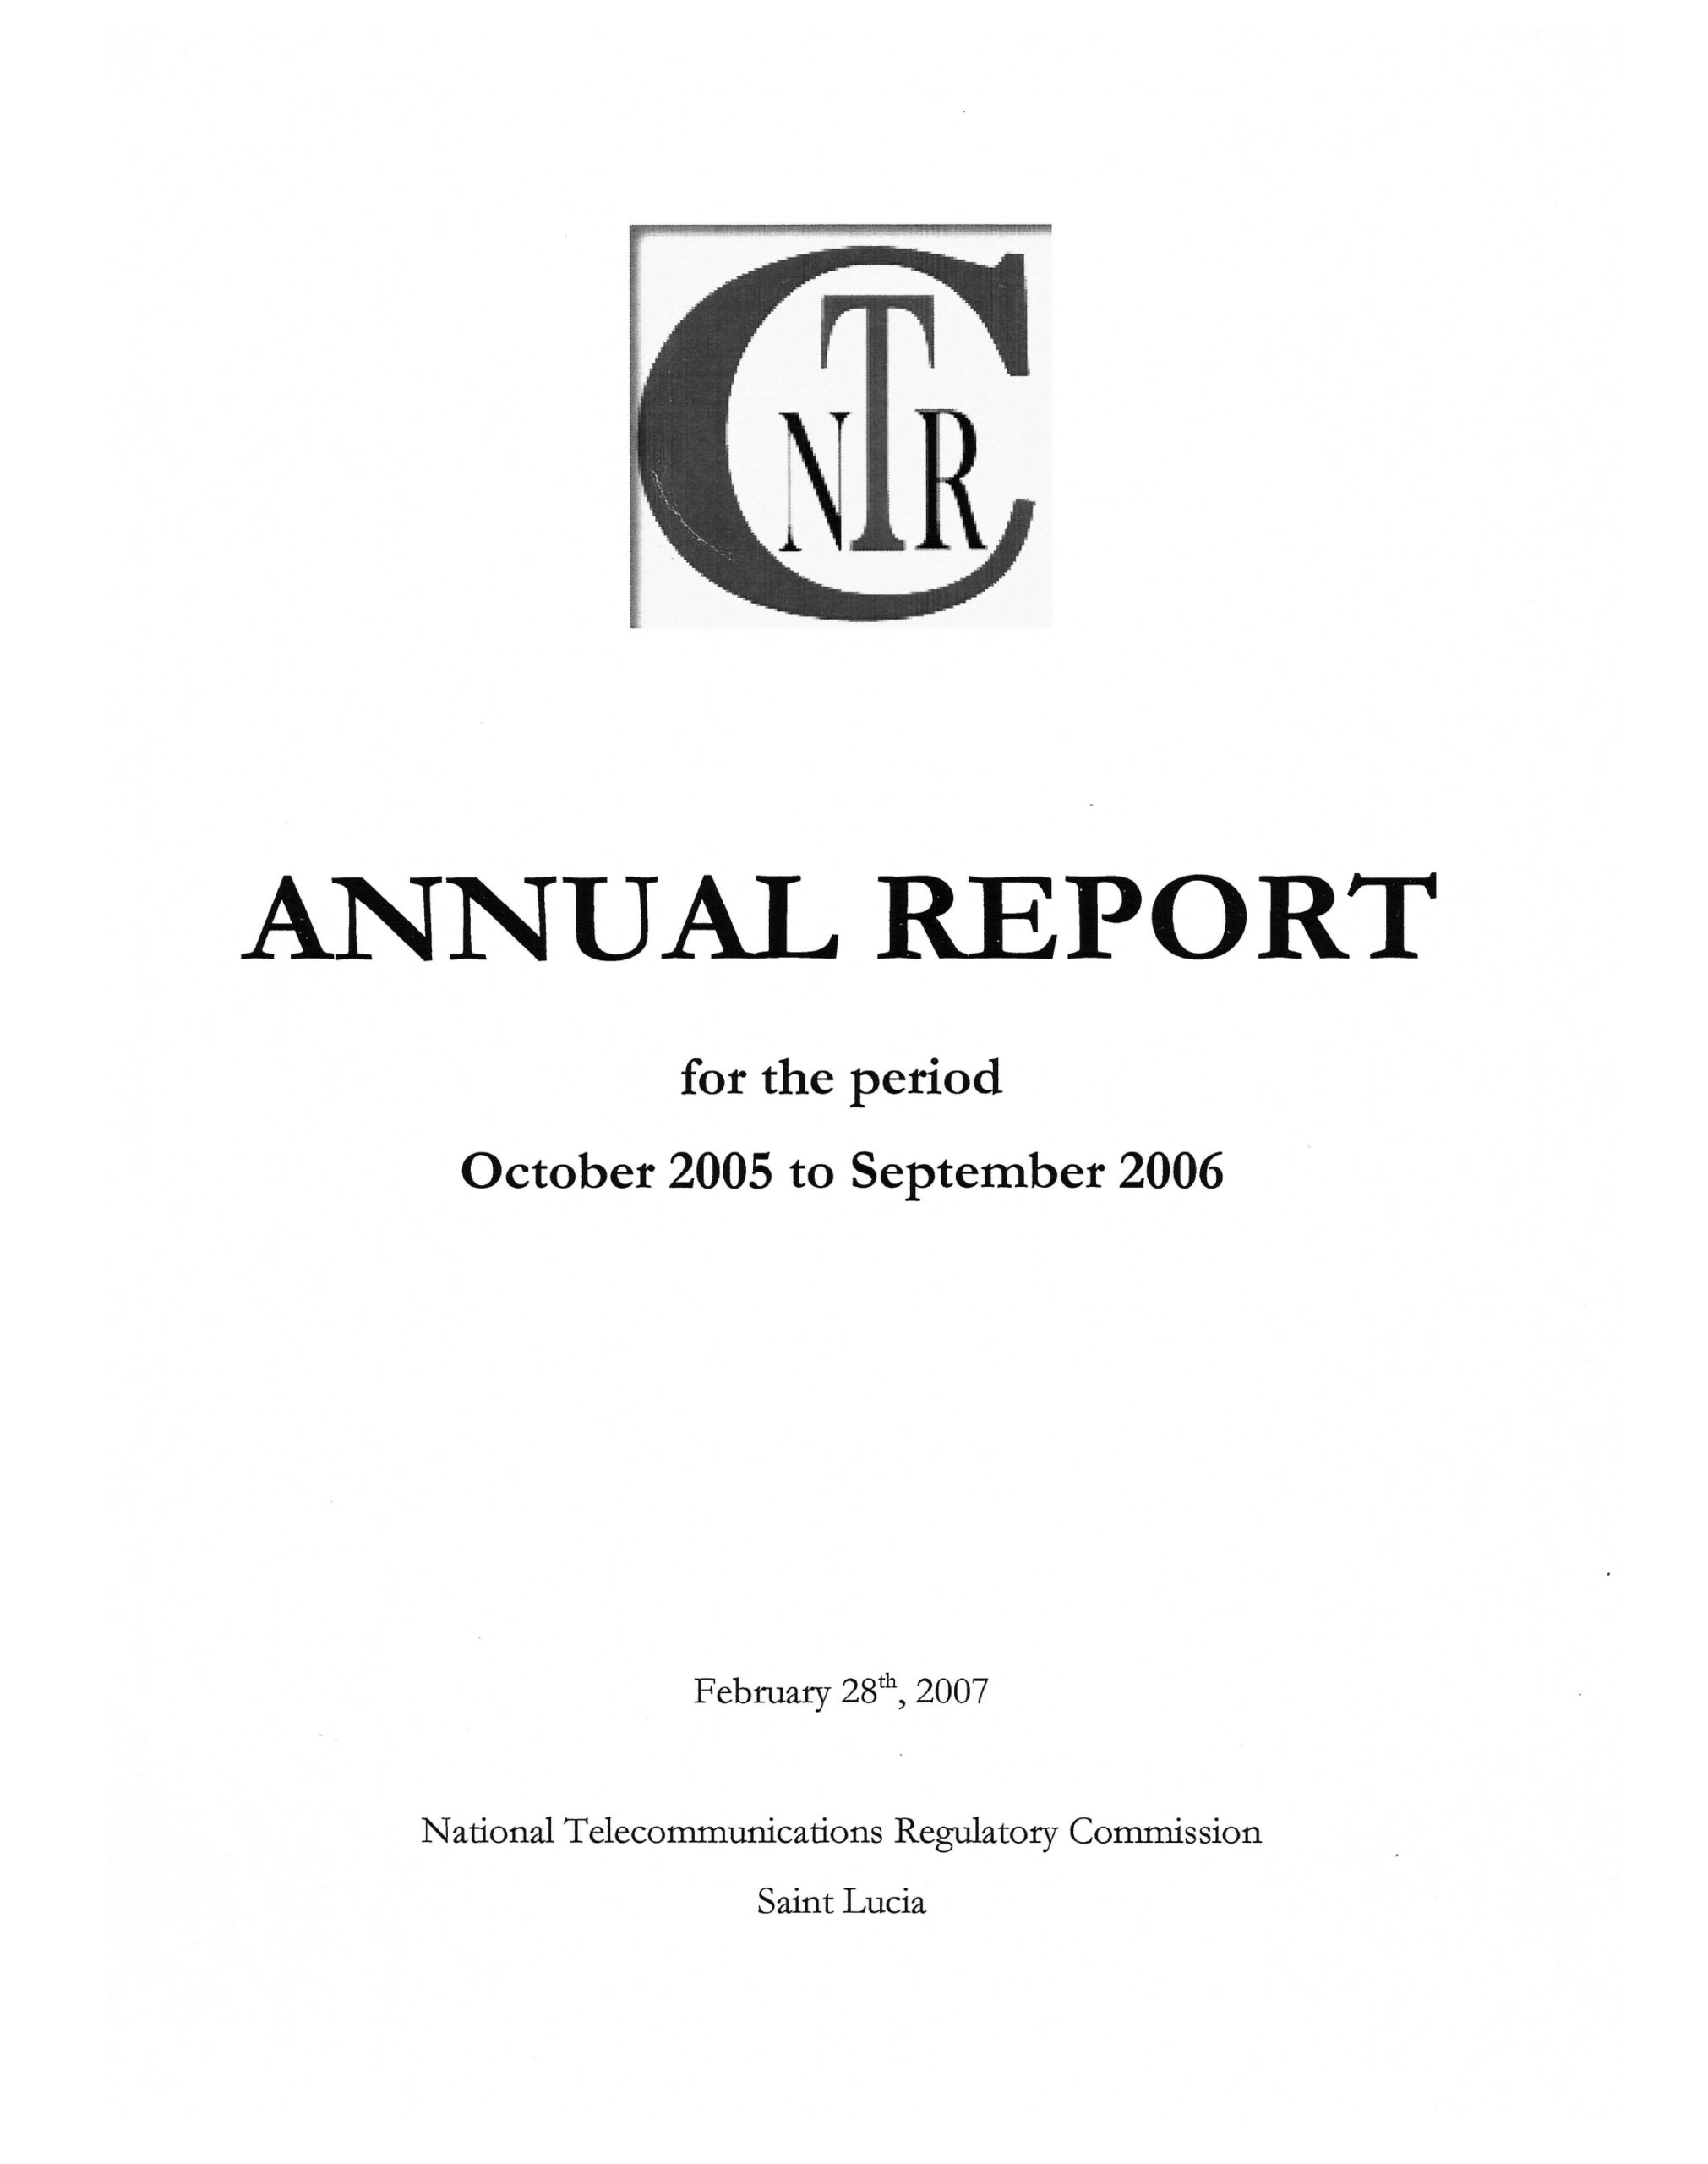 Annual Report Period October 2005 to September 2006